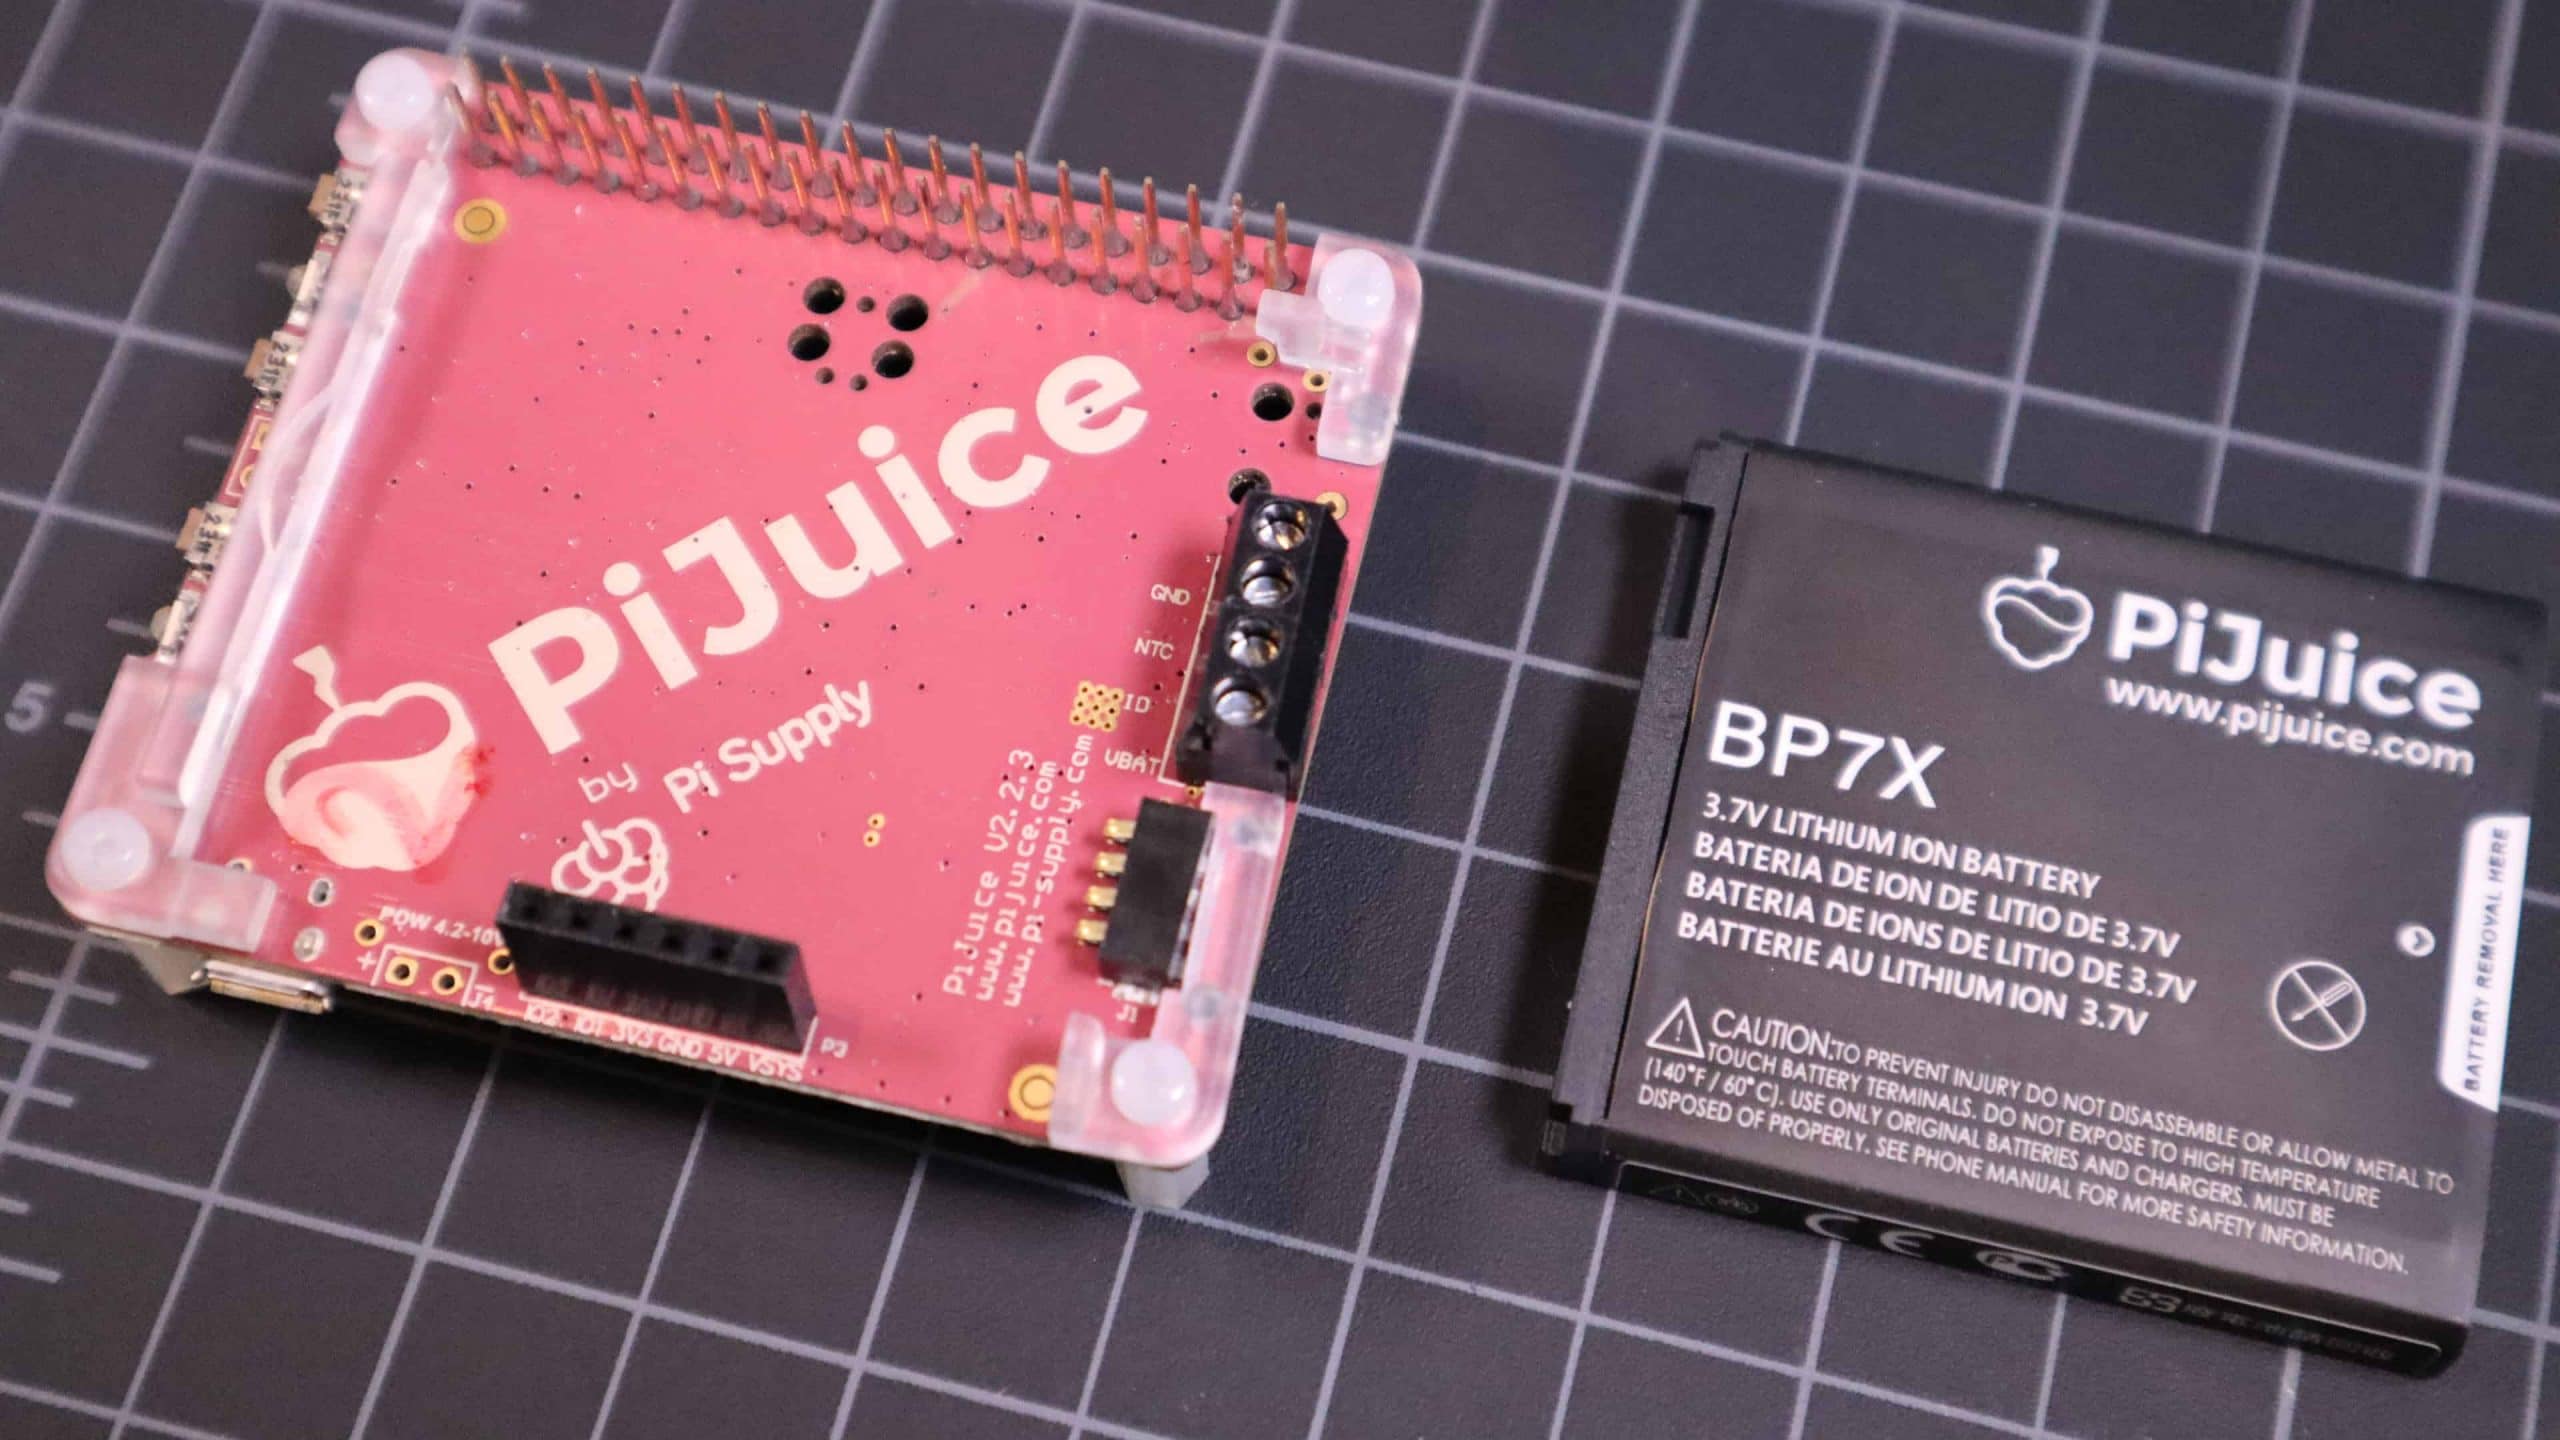 PiJuice Review - The Best Raspberry Pi Battery Pack - The Geek Pub